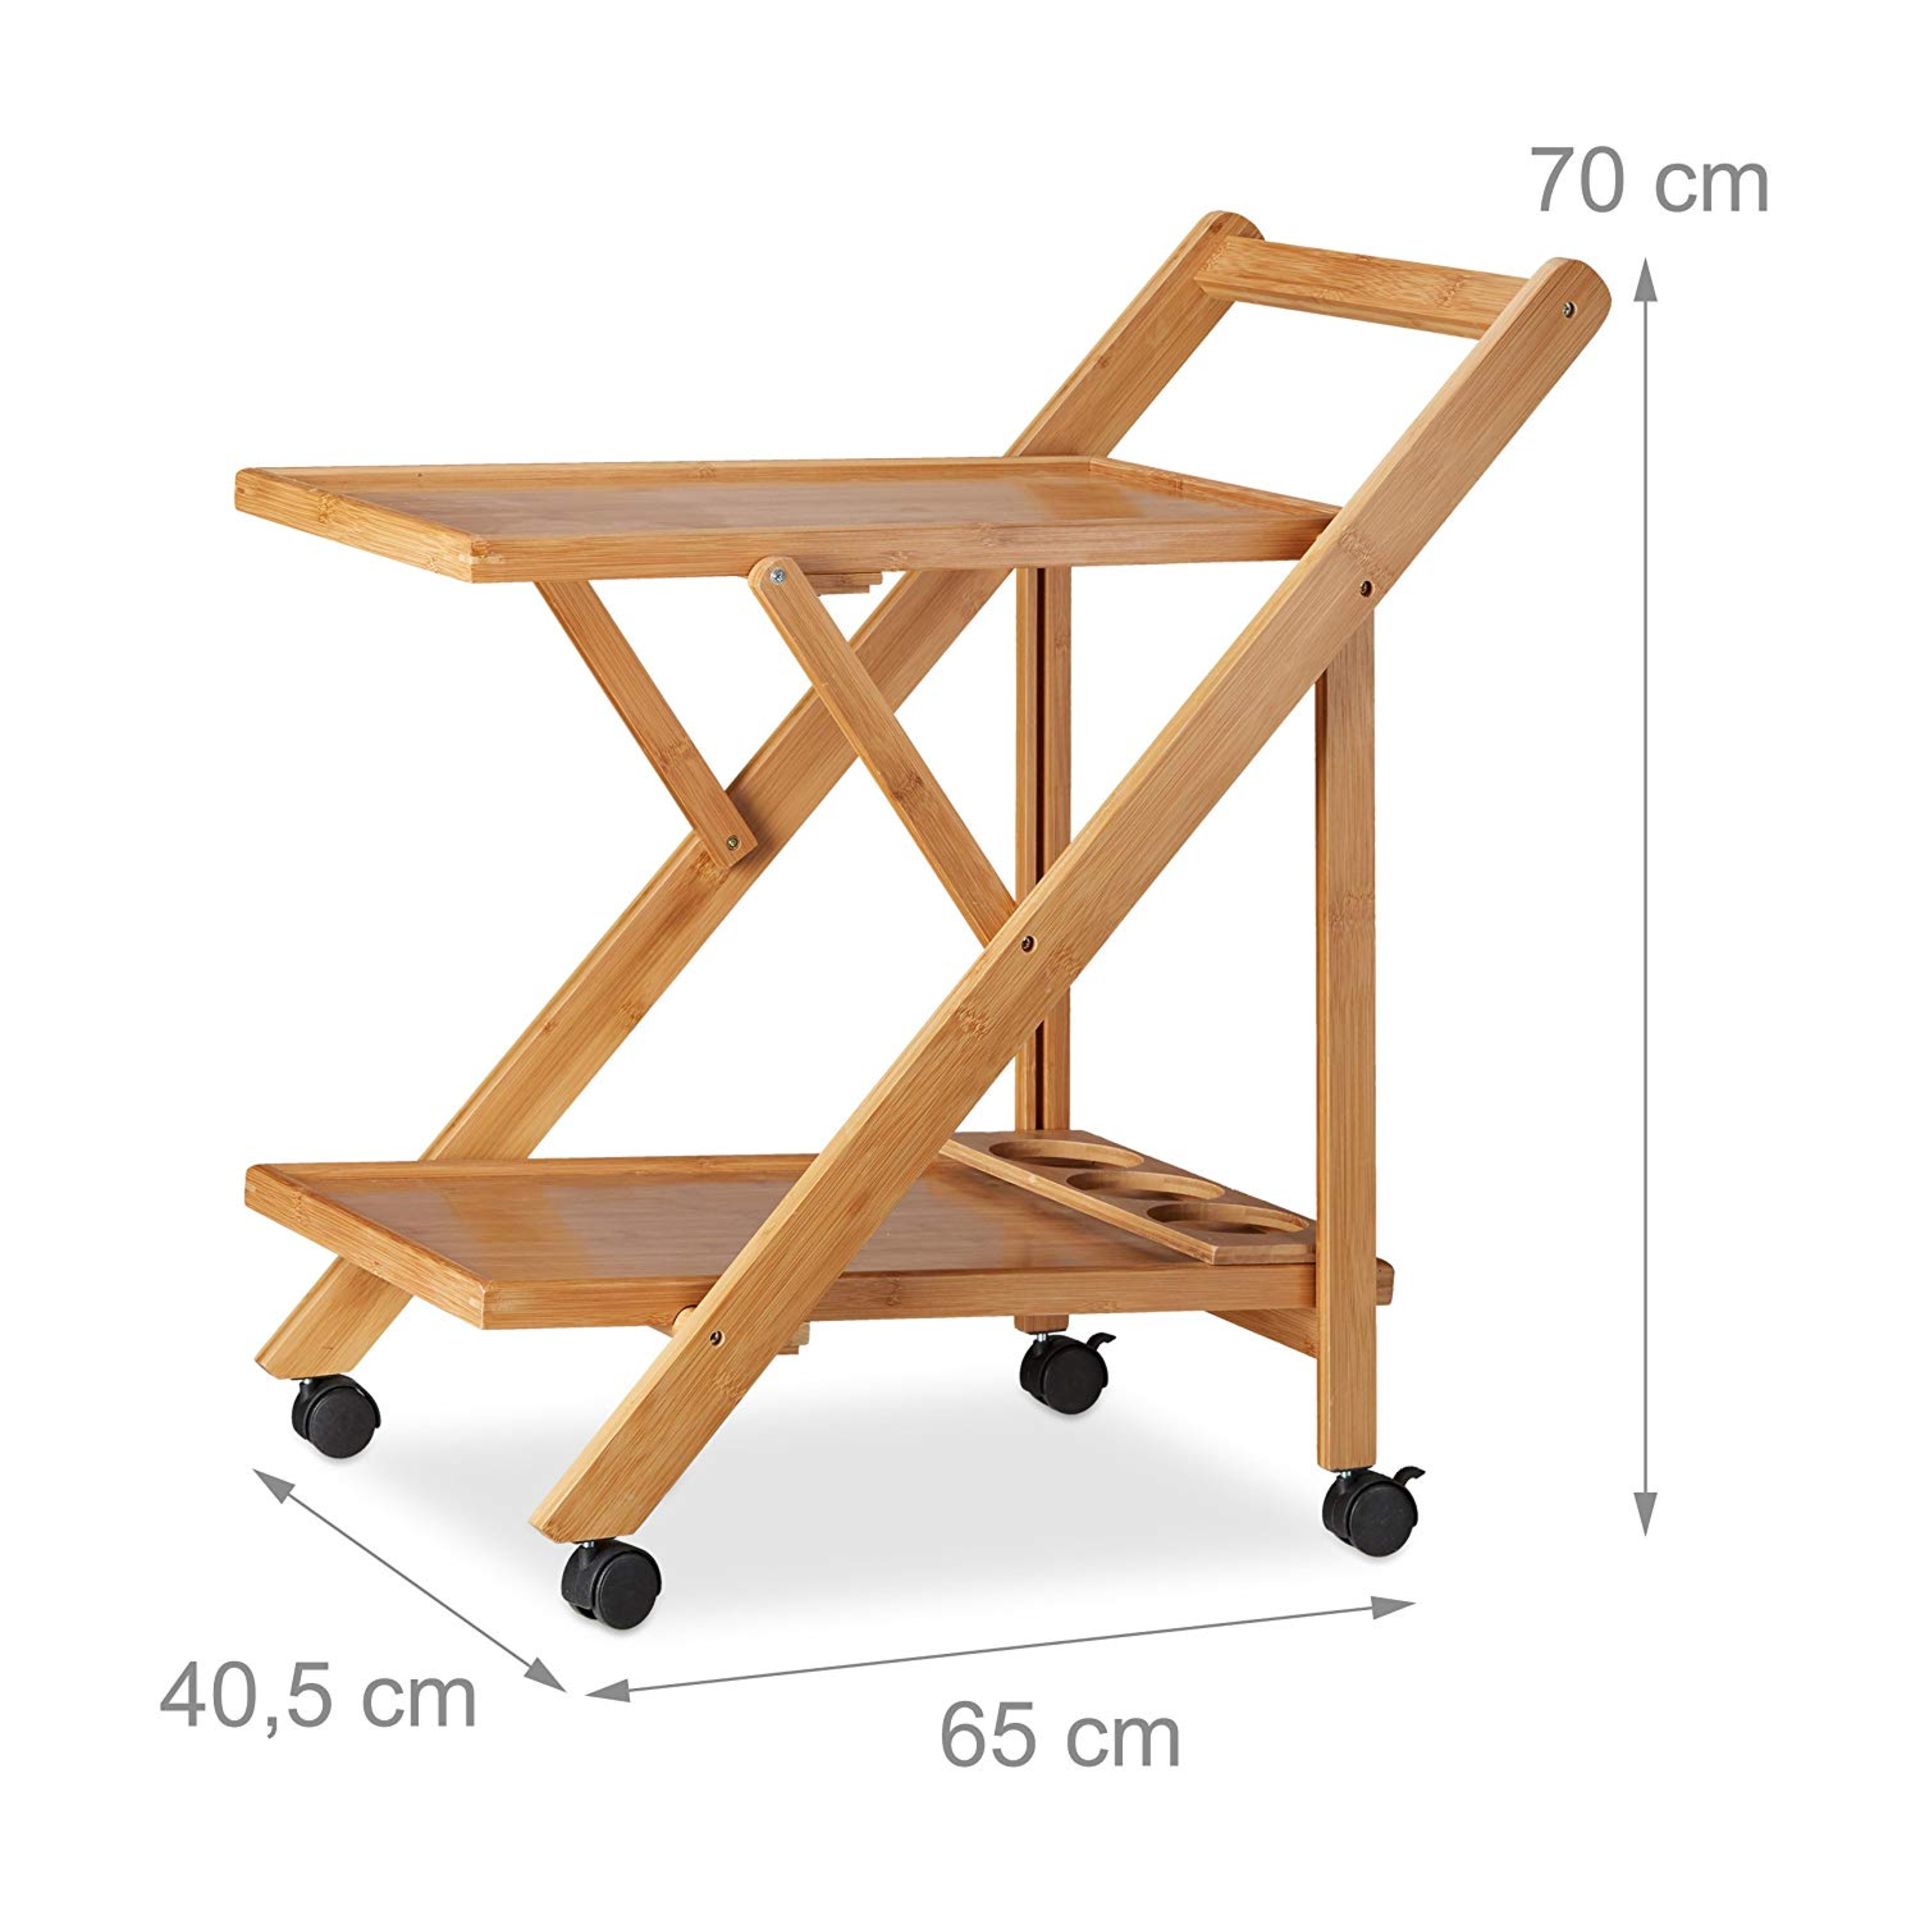 Relaxdays Bamboo Kitchen Trolley, Foldable Serving Cart RRP £69.99